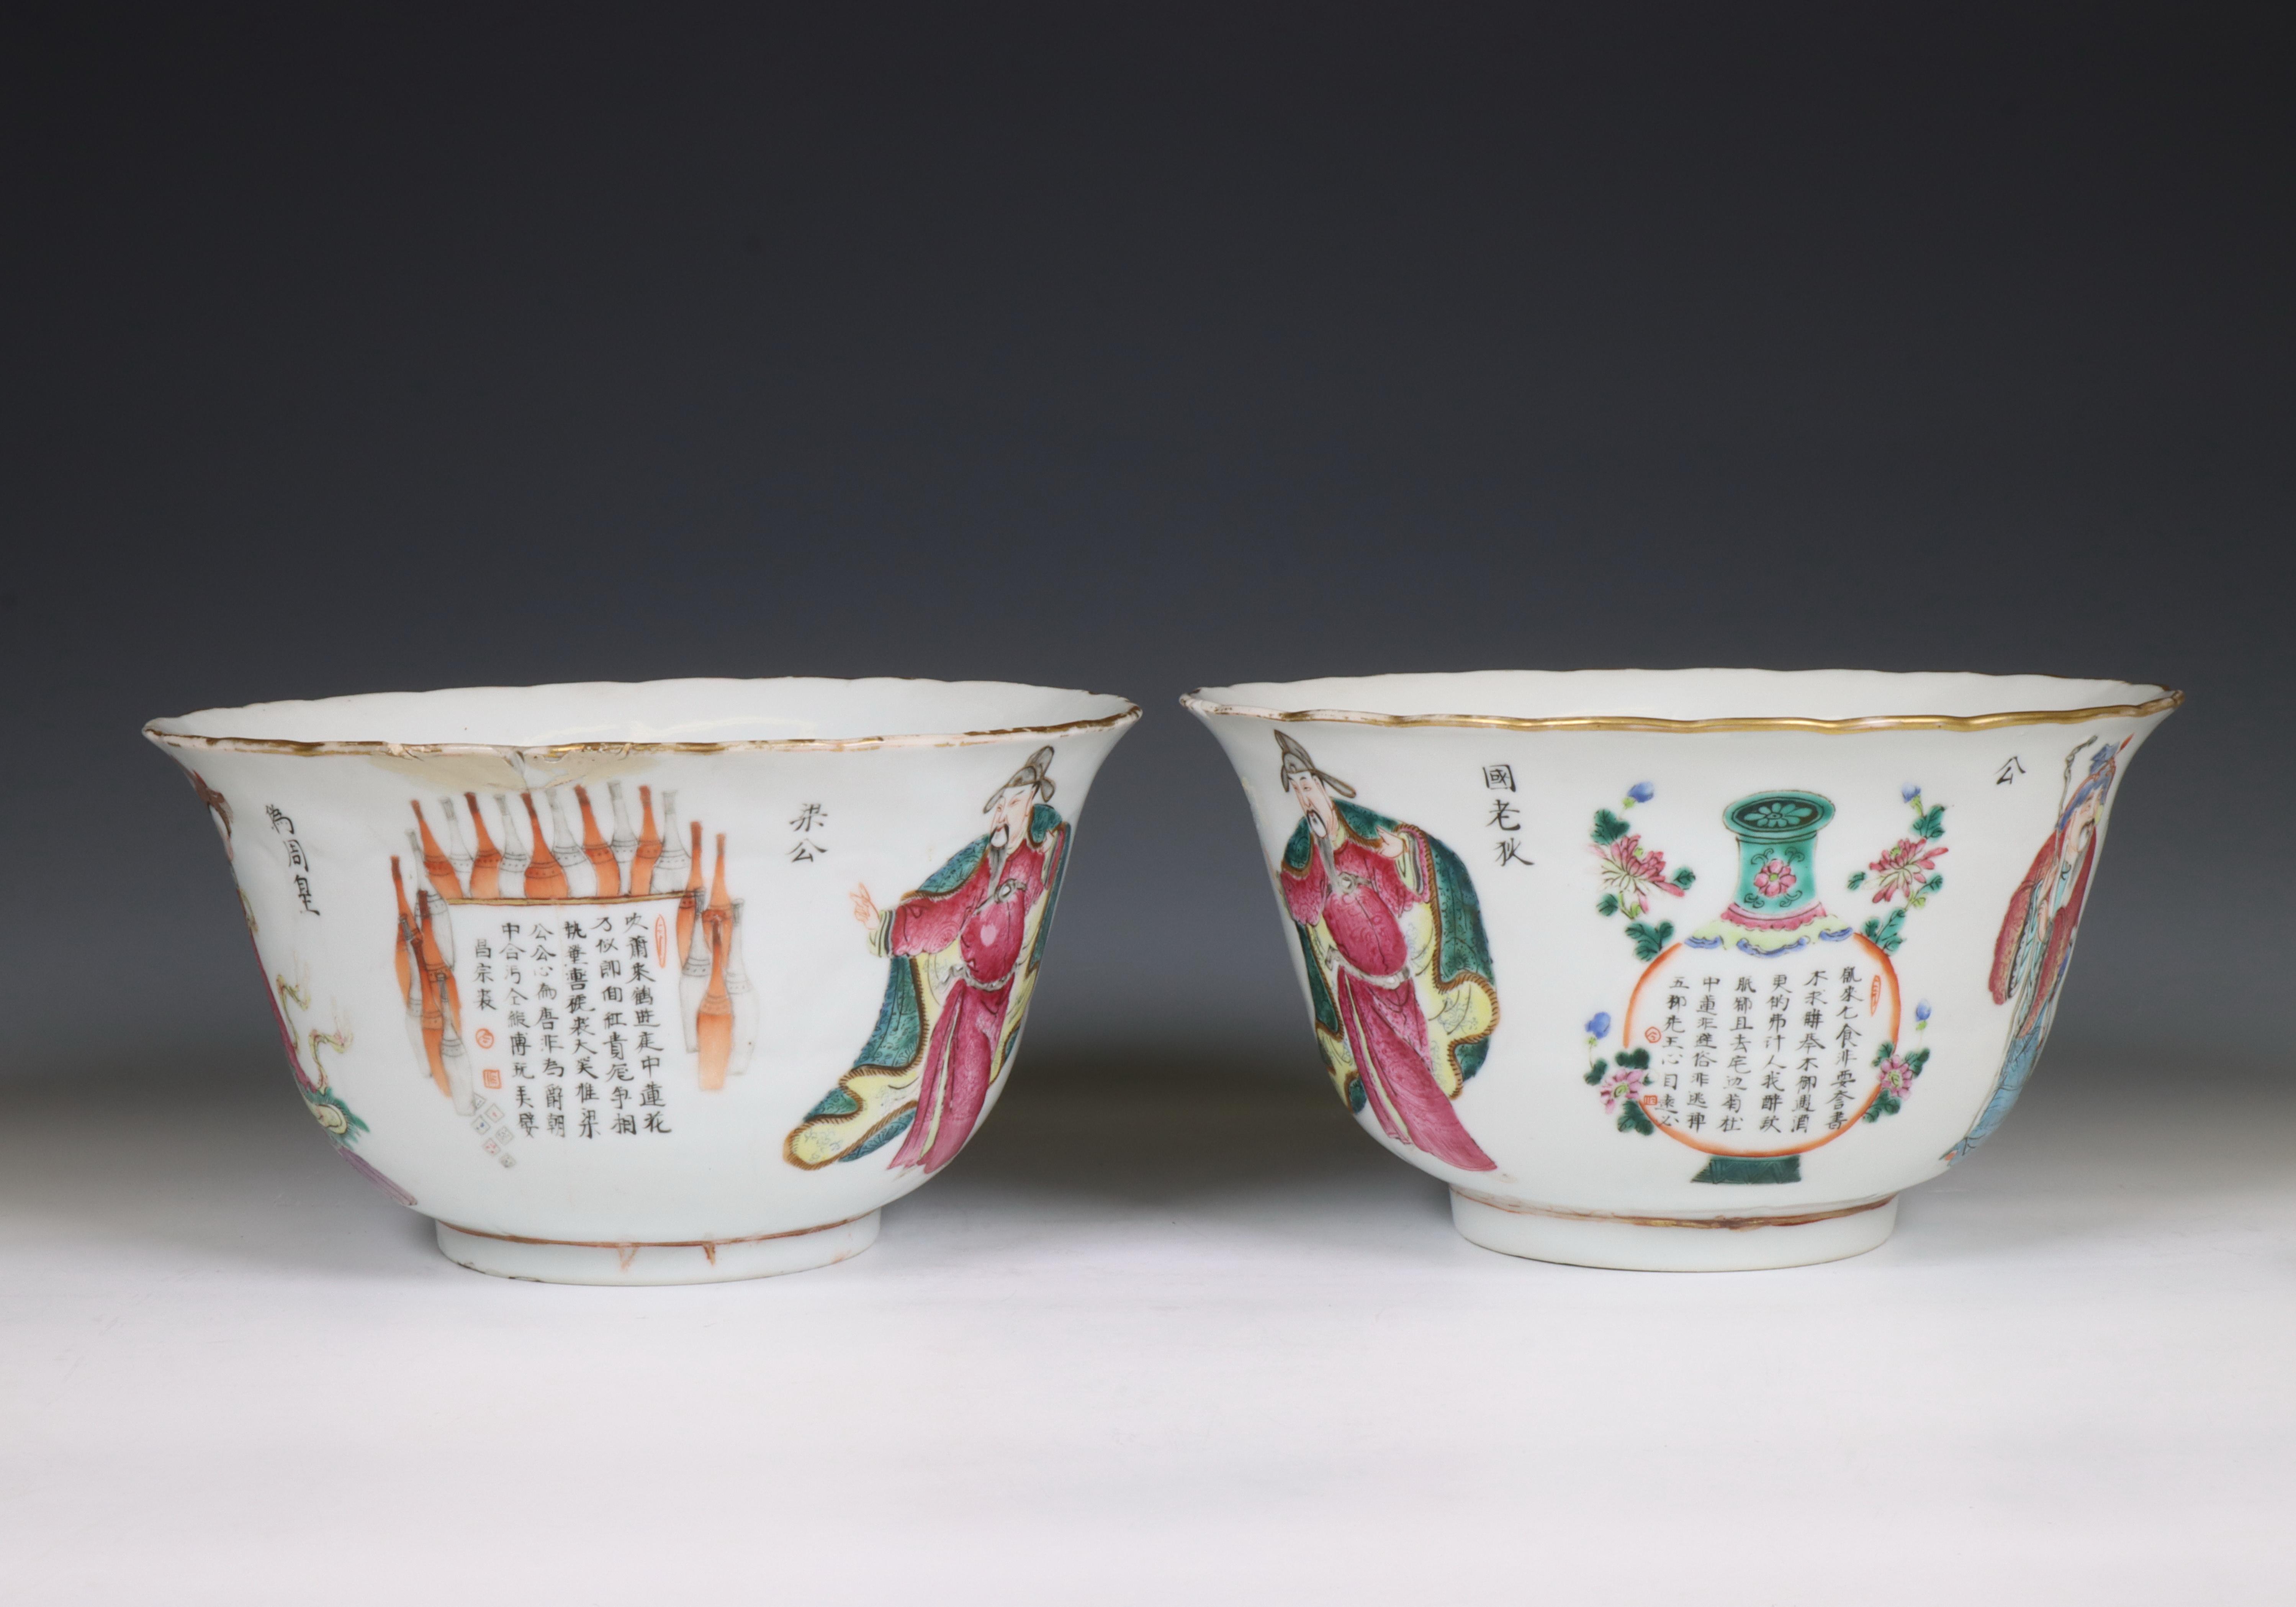 China, two famille rose porcelain 'Wu Shuang Pu' bowls, late Qing dynasty (1644-1912), - Image 9 of 9